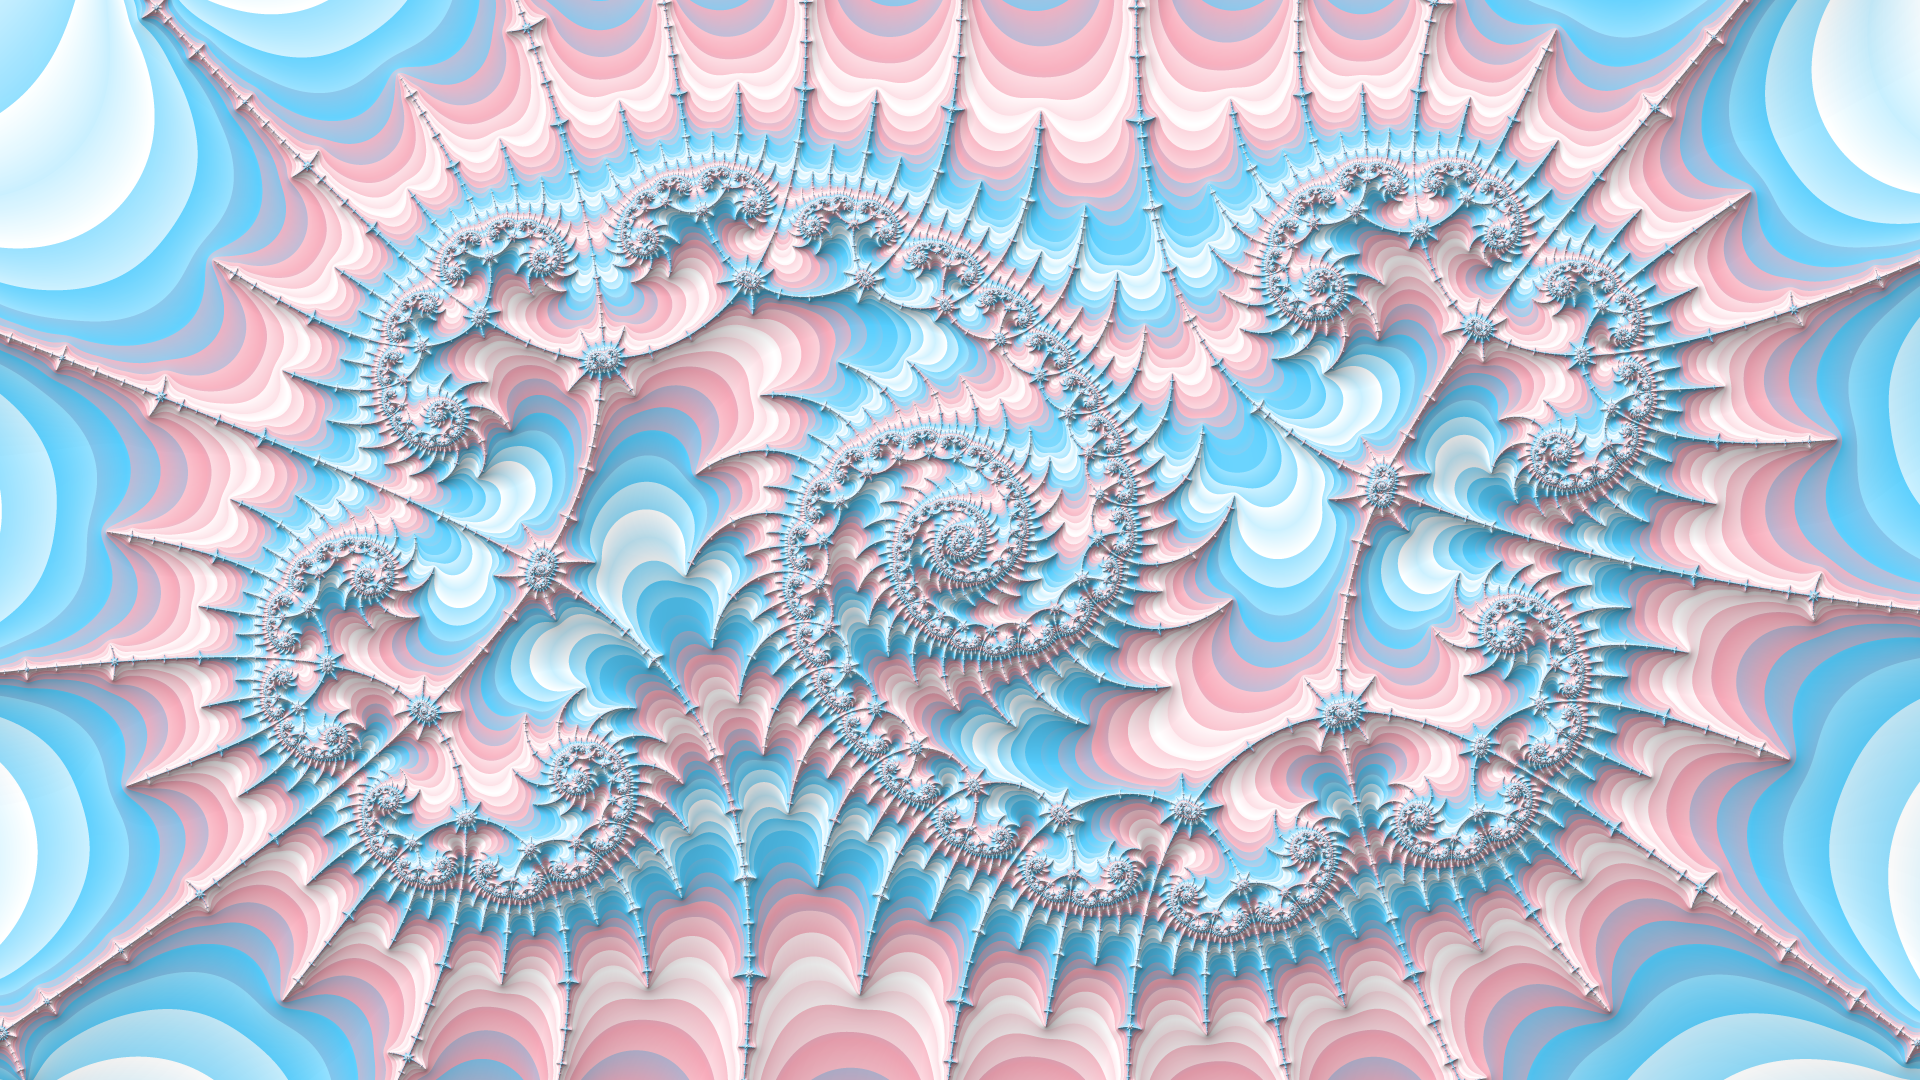 a mandelbrot fractal render with the colors of the trans pride flag